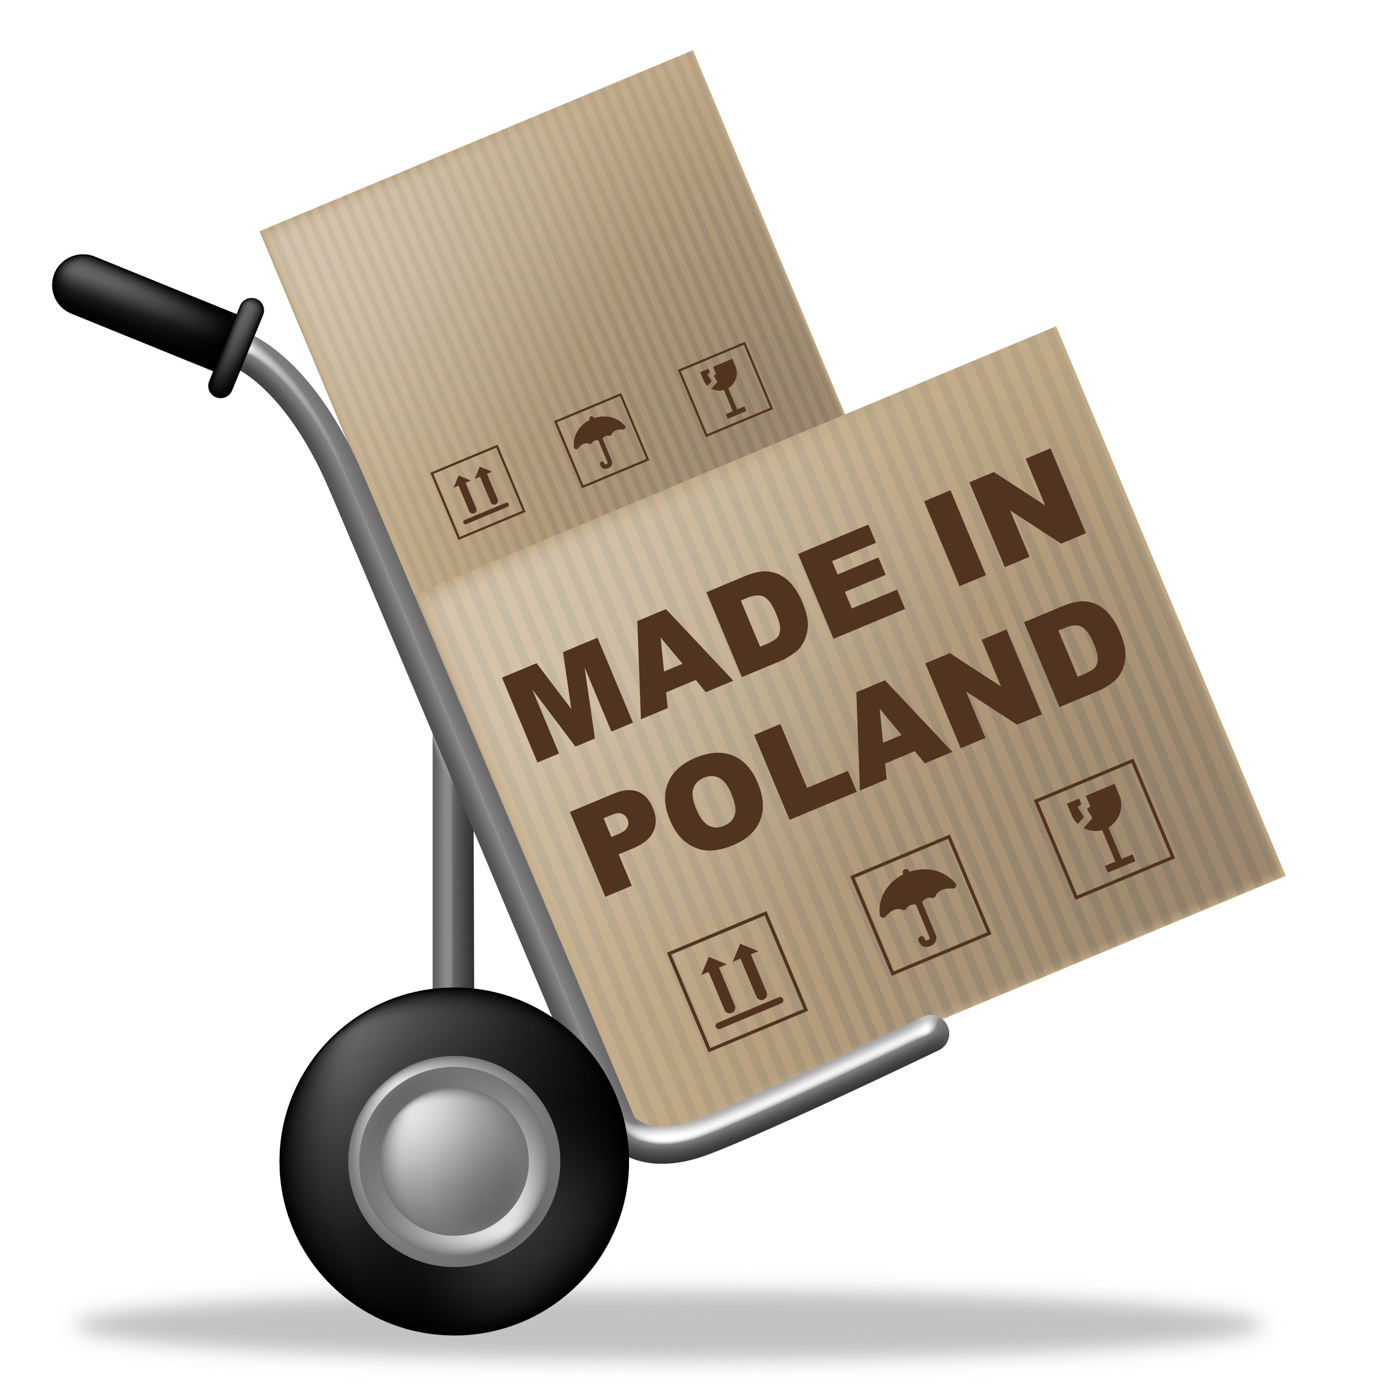 Made in poland indicates shipping box and cardboard photo